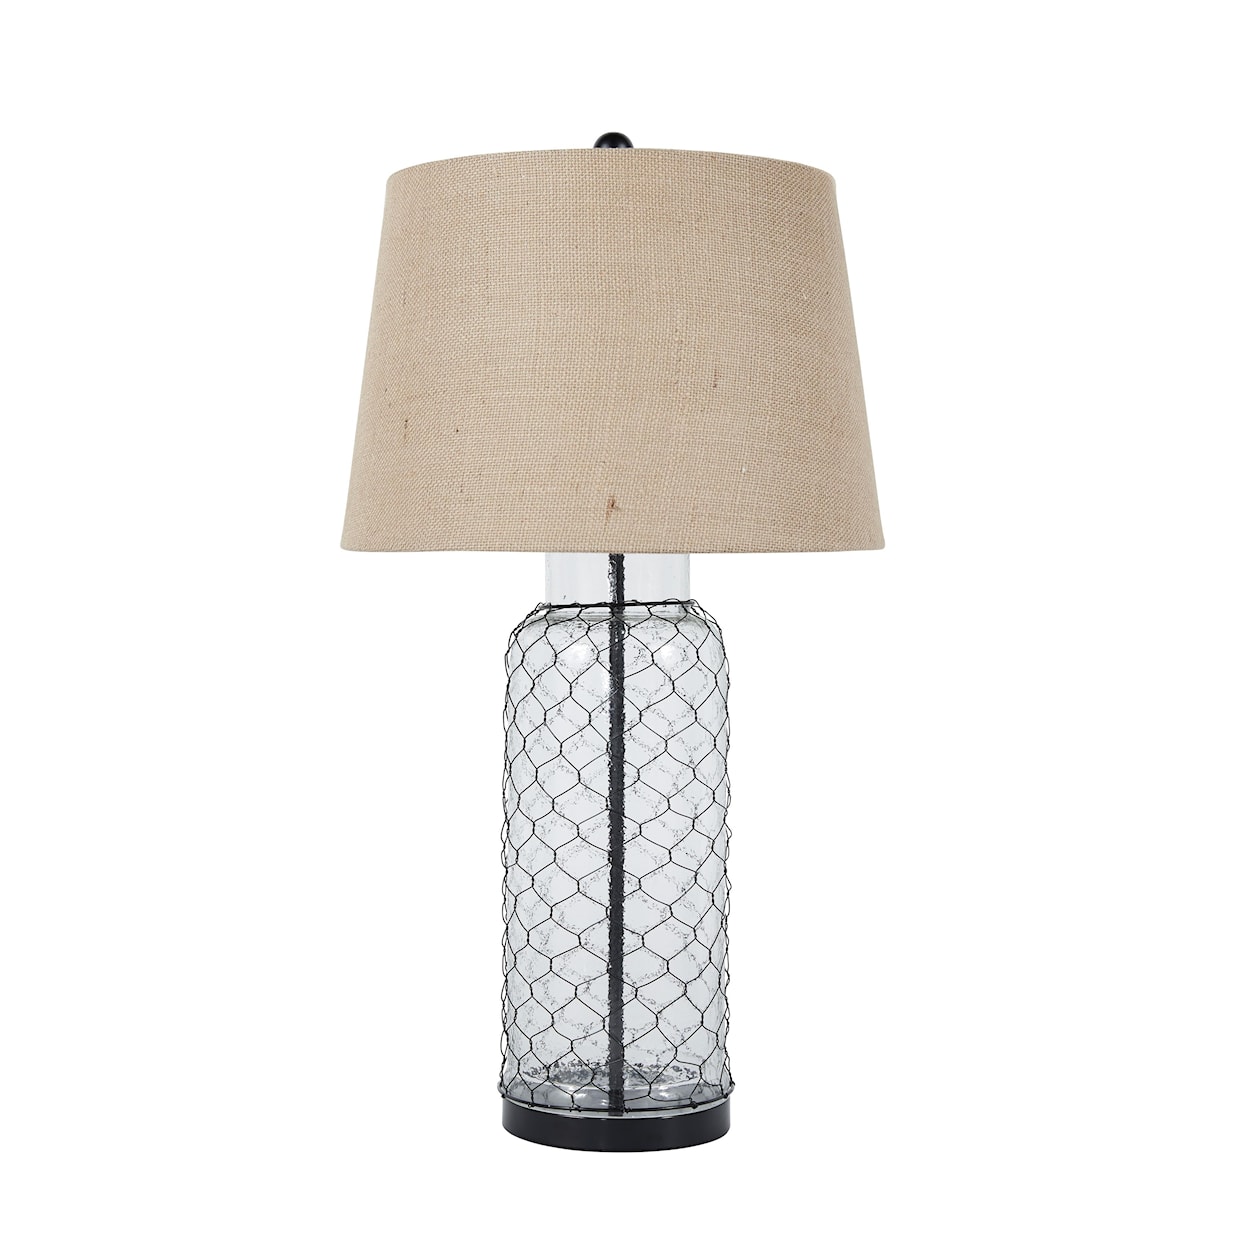 Signature Design by Ashley Lamps - Vintage Style Glass Table Lamp 